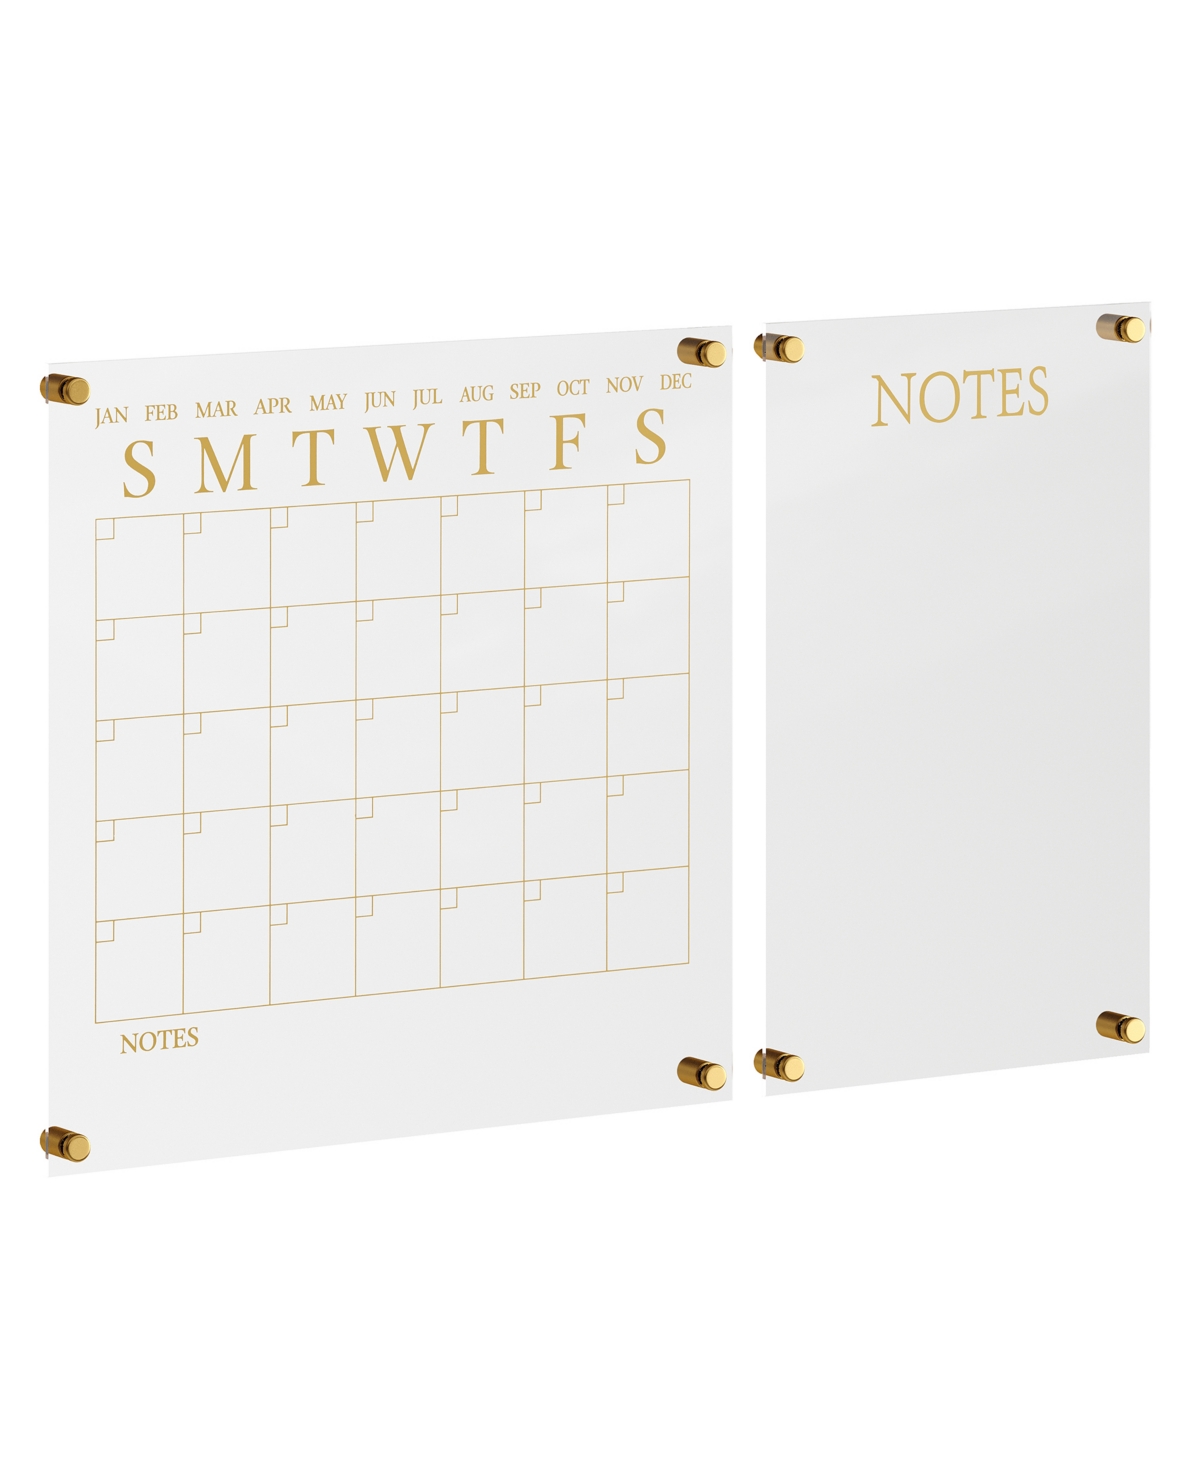 Grayson Acrylic Wall Calendar and Notes Board Set with Dry Erase Marker and Mounting Hardware - Clear, Gold